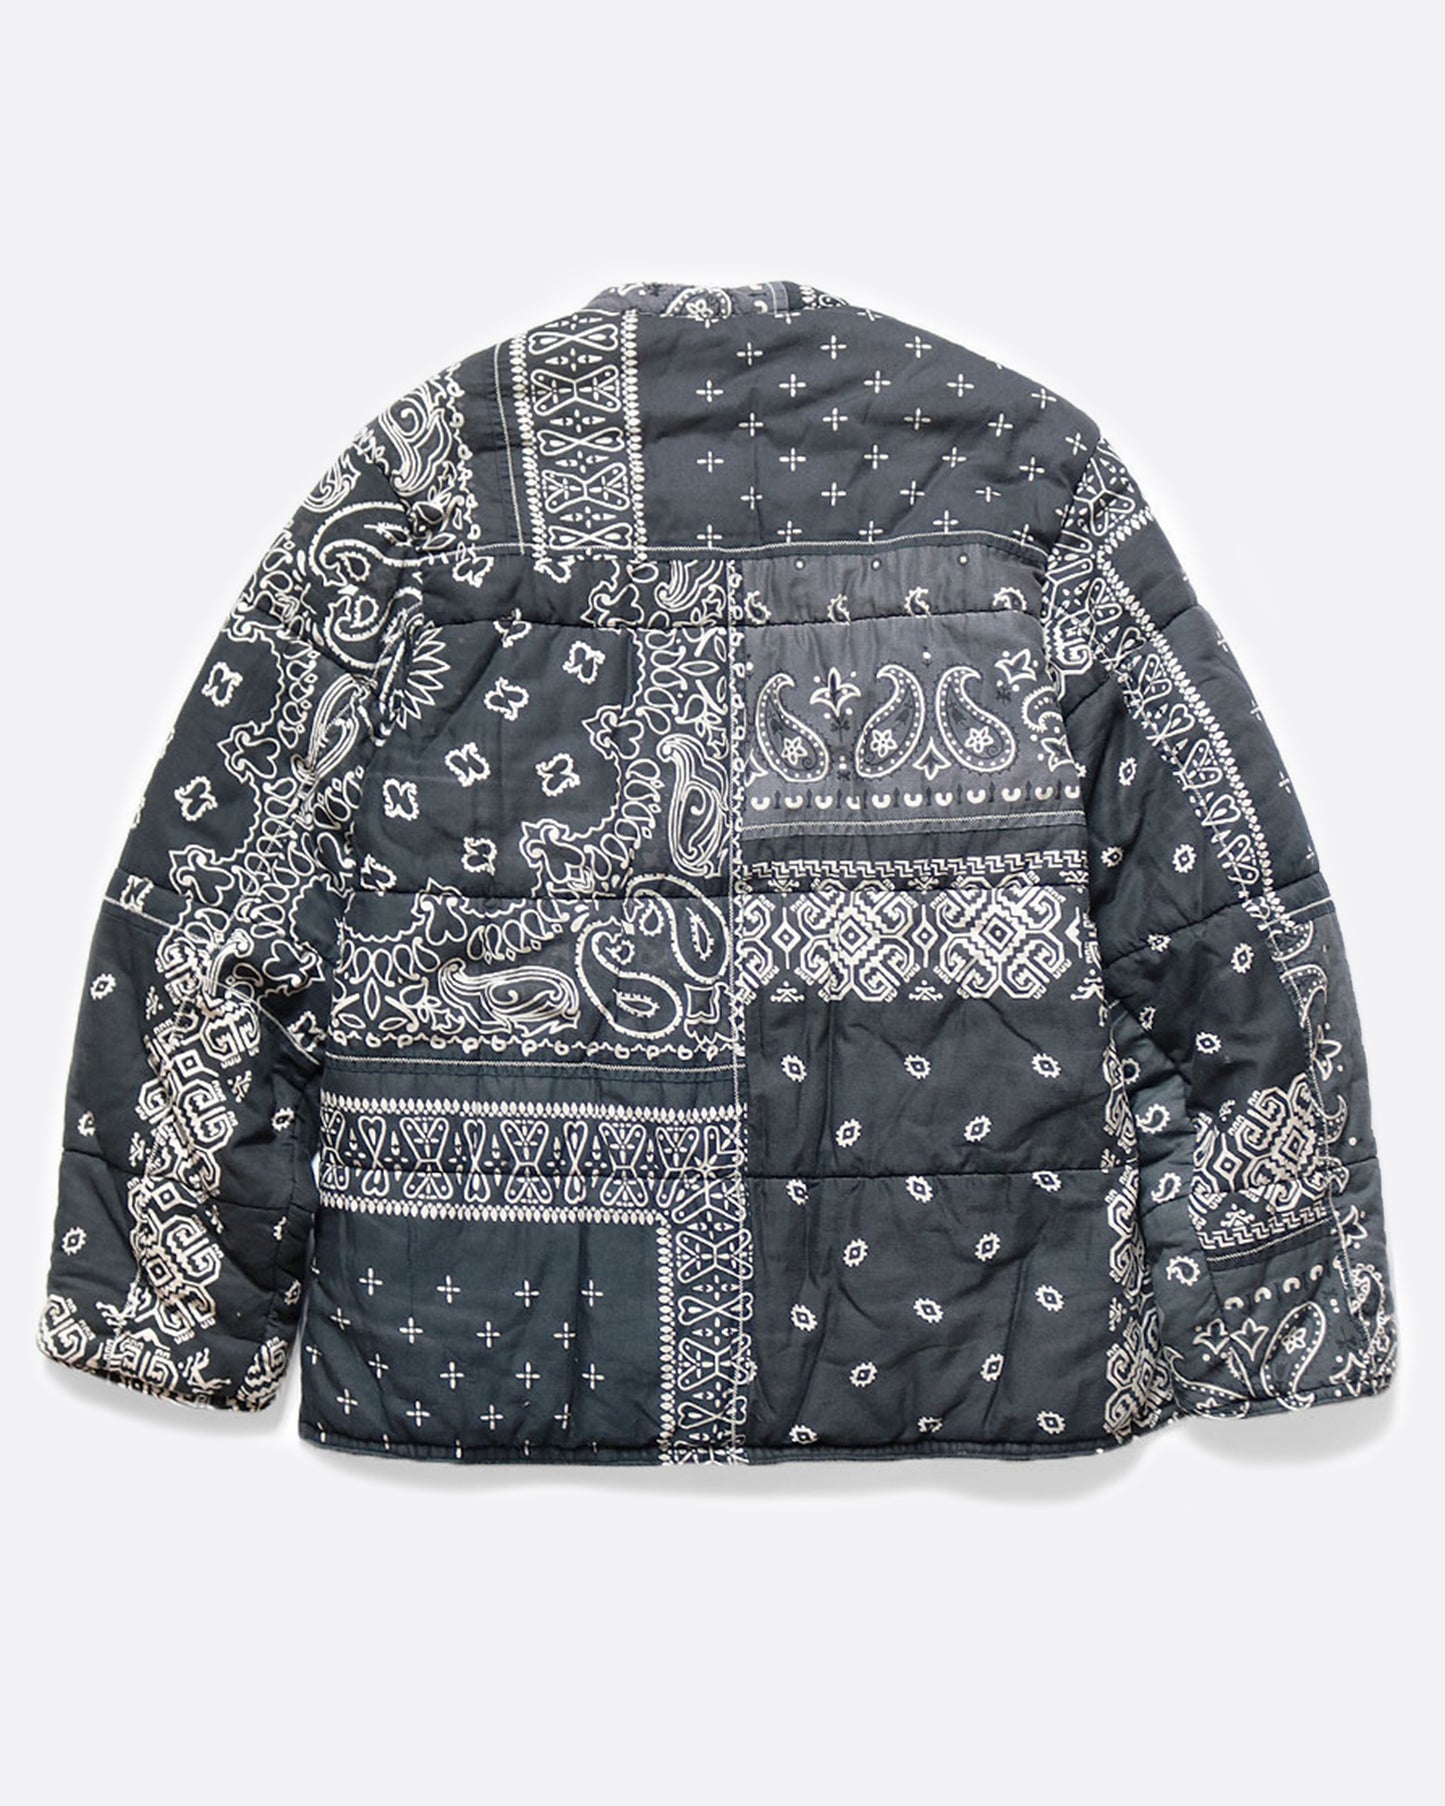 A button down quilted patchwork bandana jacket, shown laying flat on its back side in the black colorway.